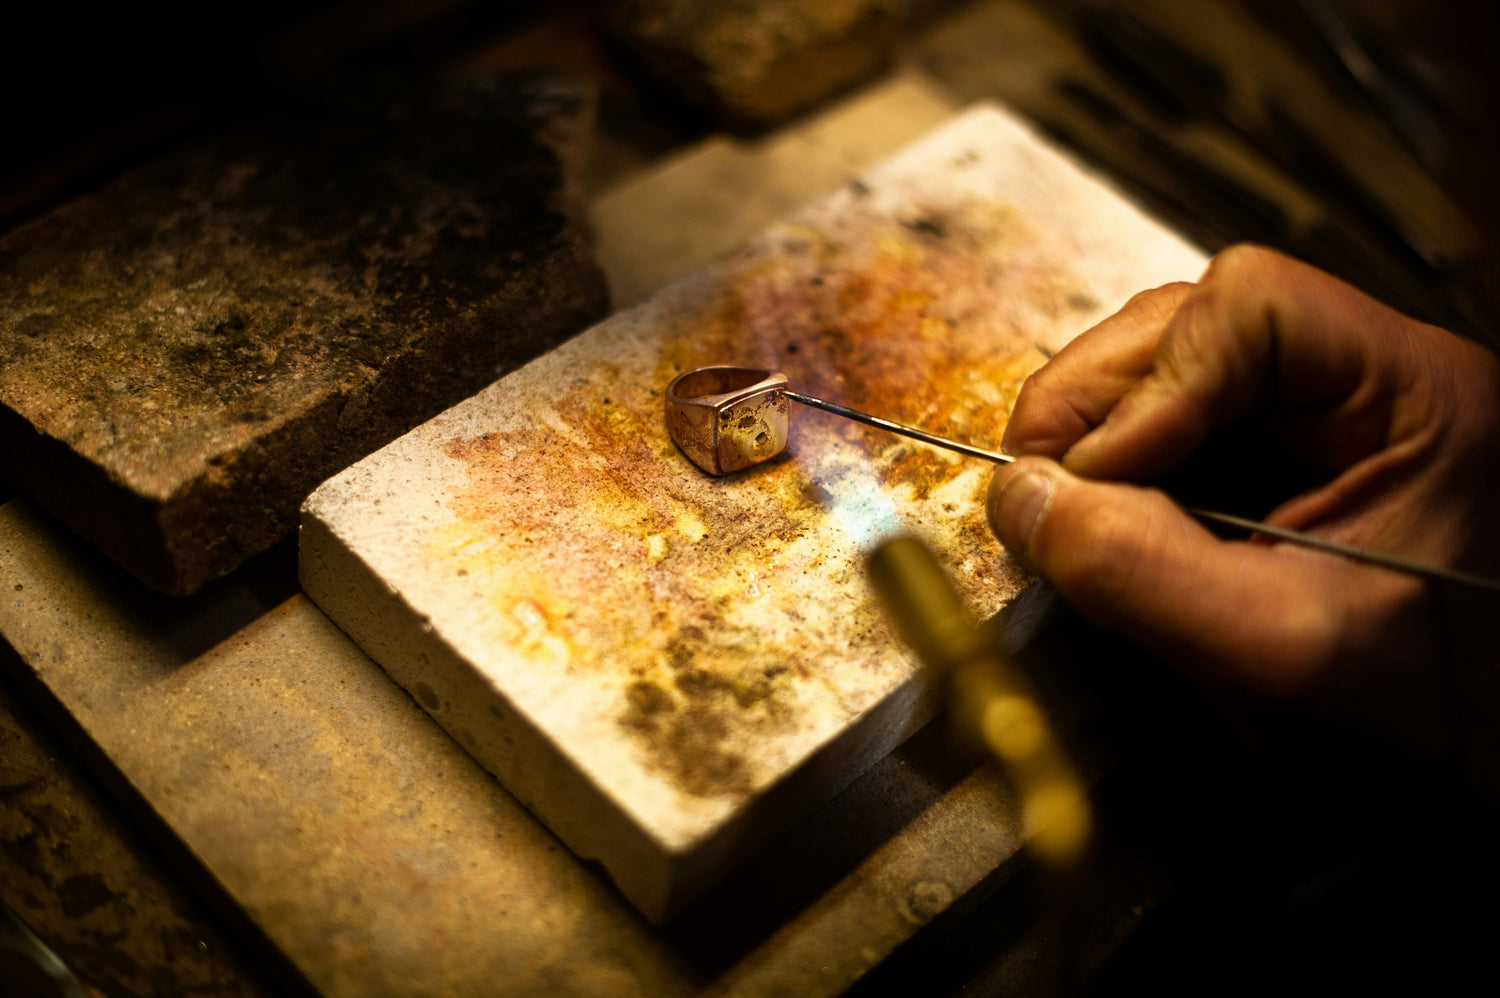 Jeweler Working on a Handmade Gold Ring at a Jewelers Bench